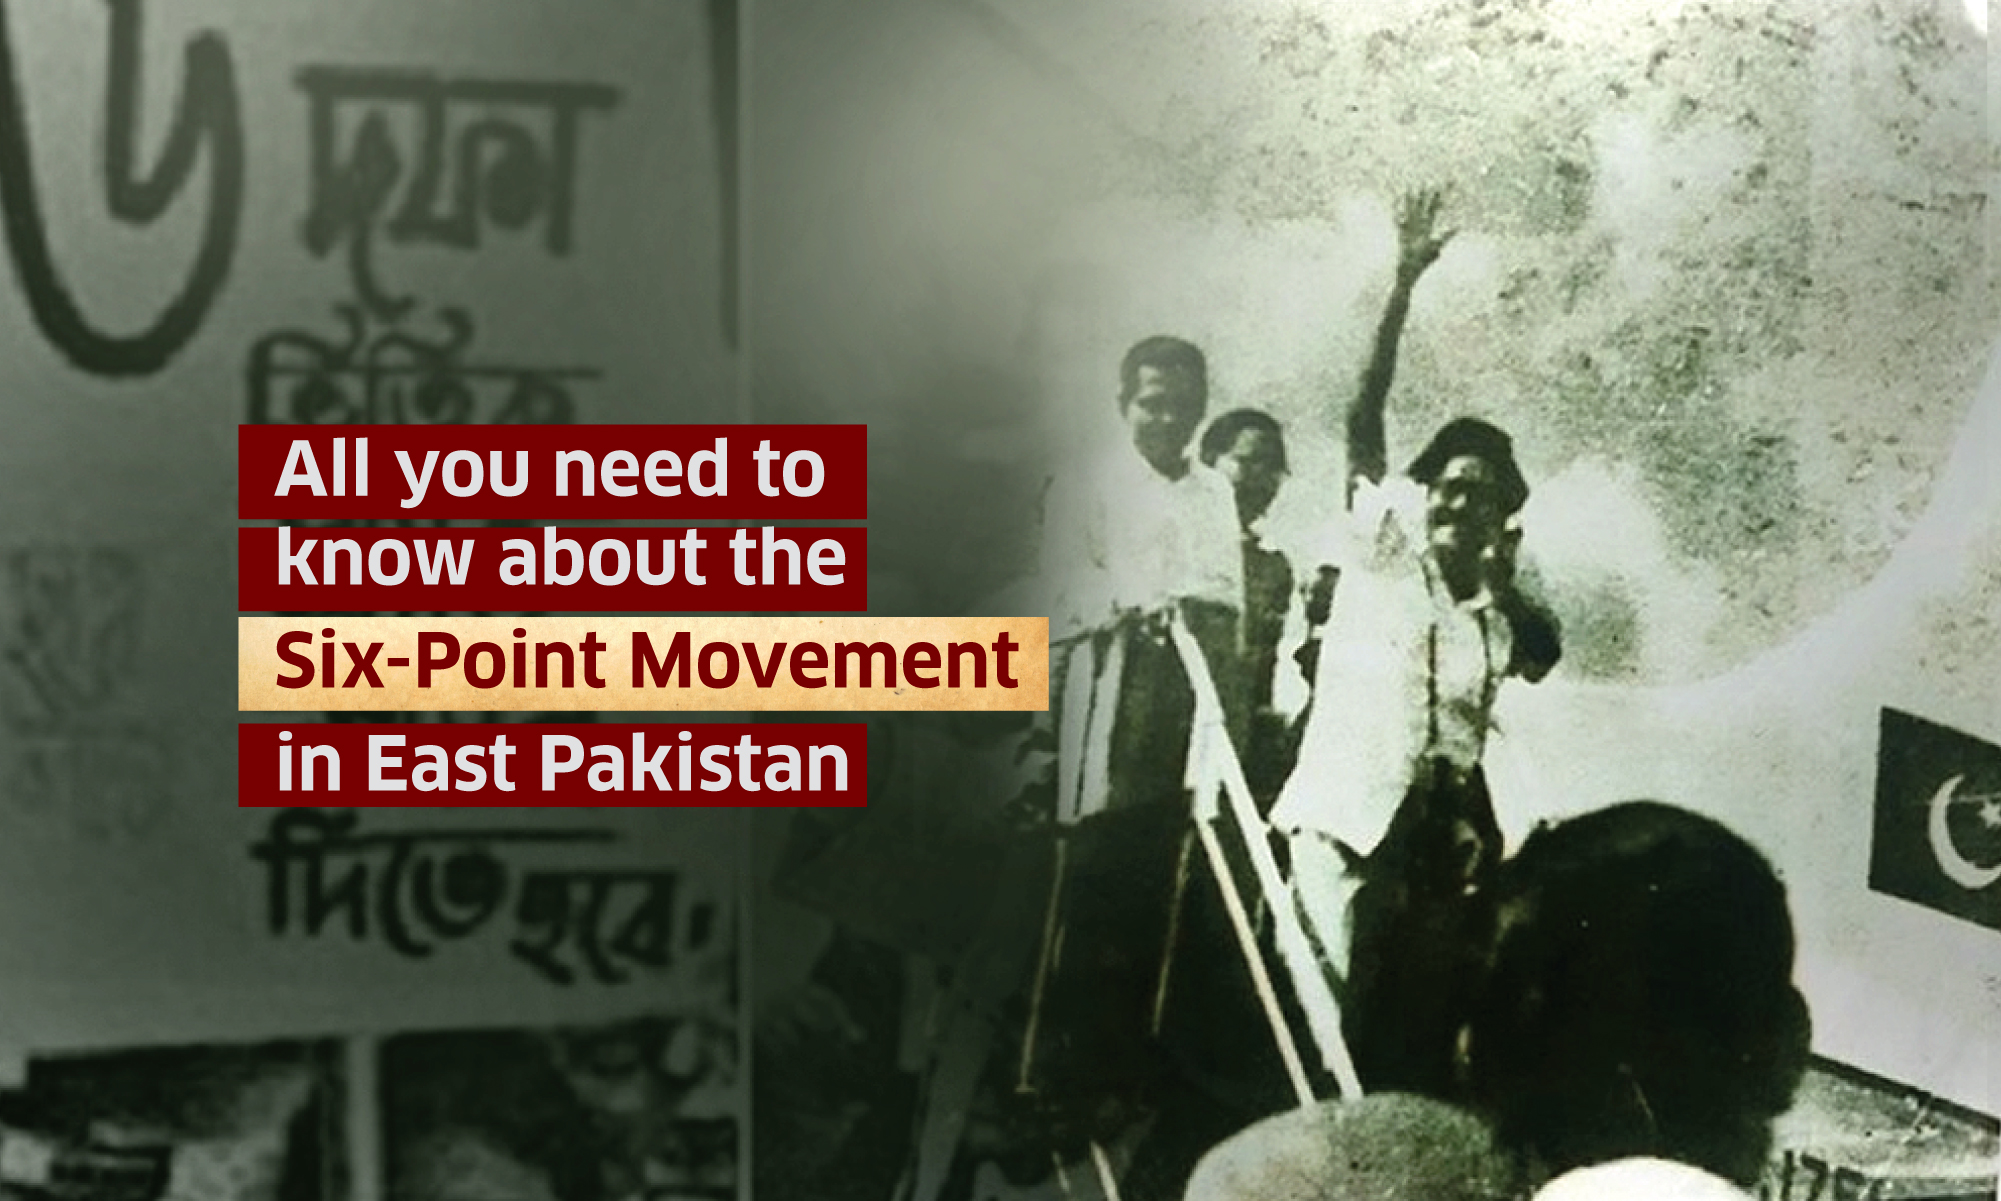 All you need to know about the Six-Point Movement in East Pakistan